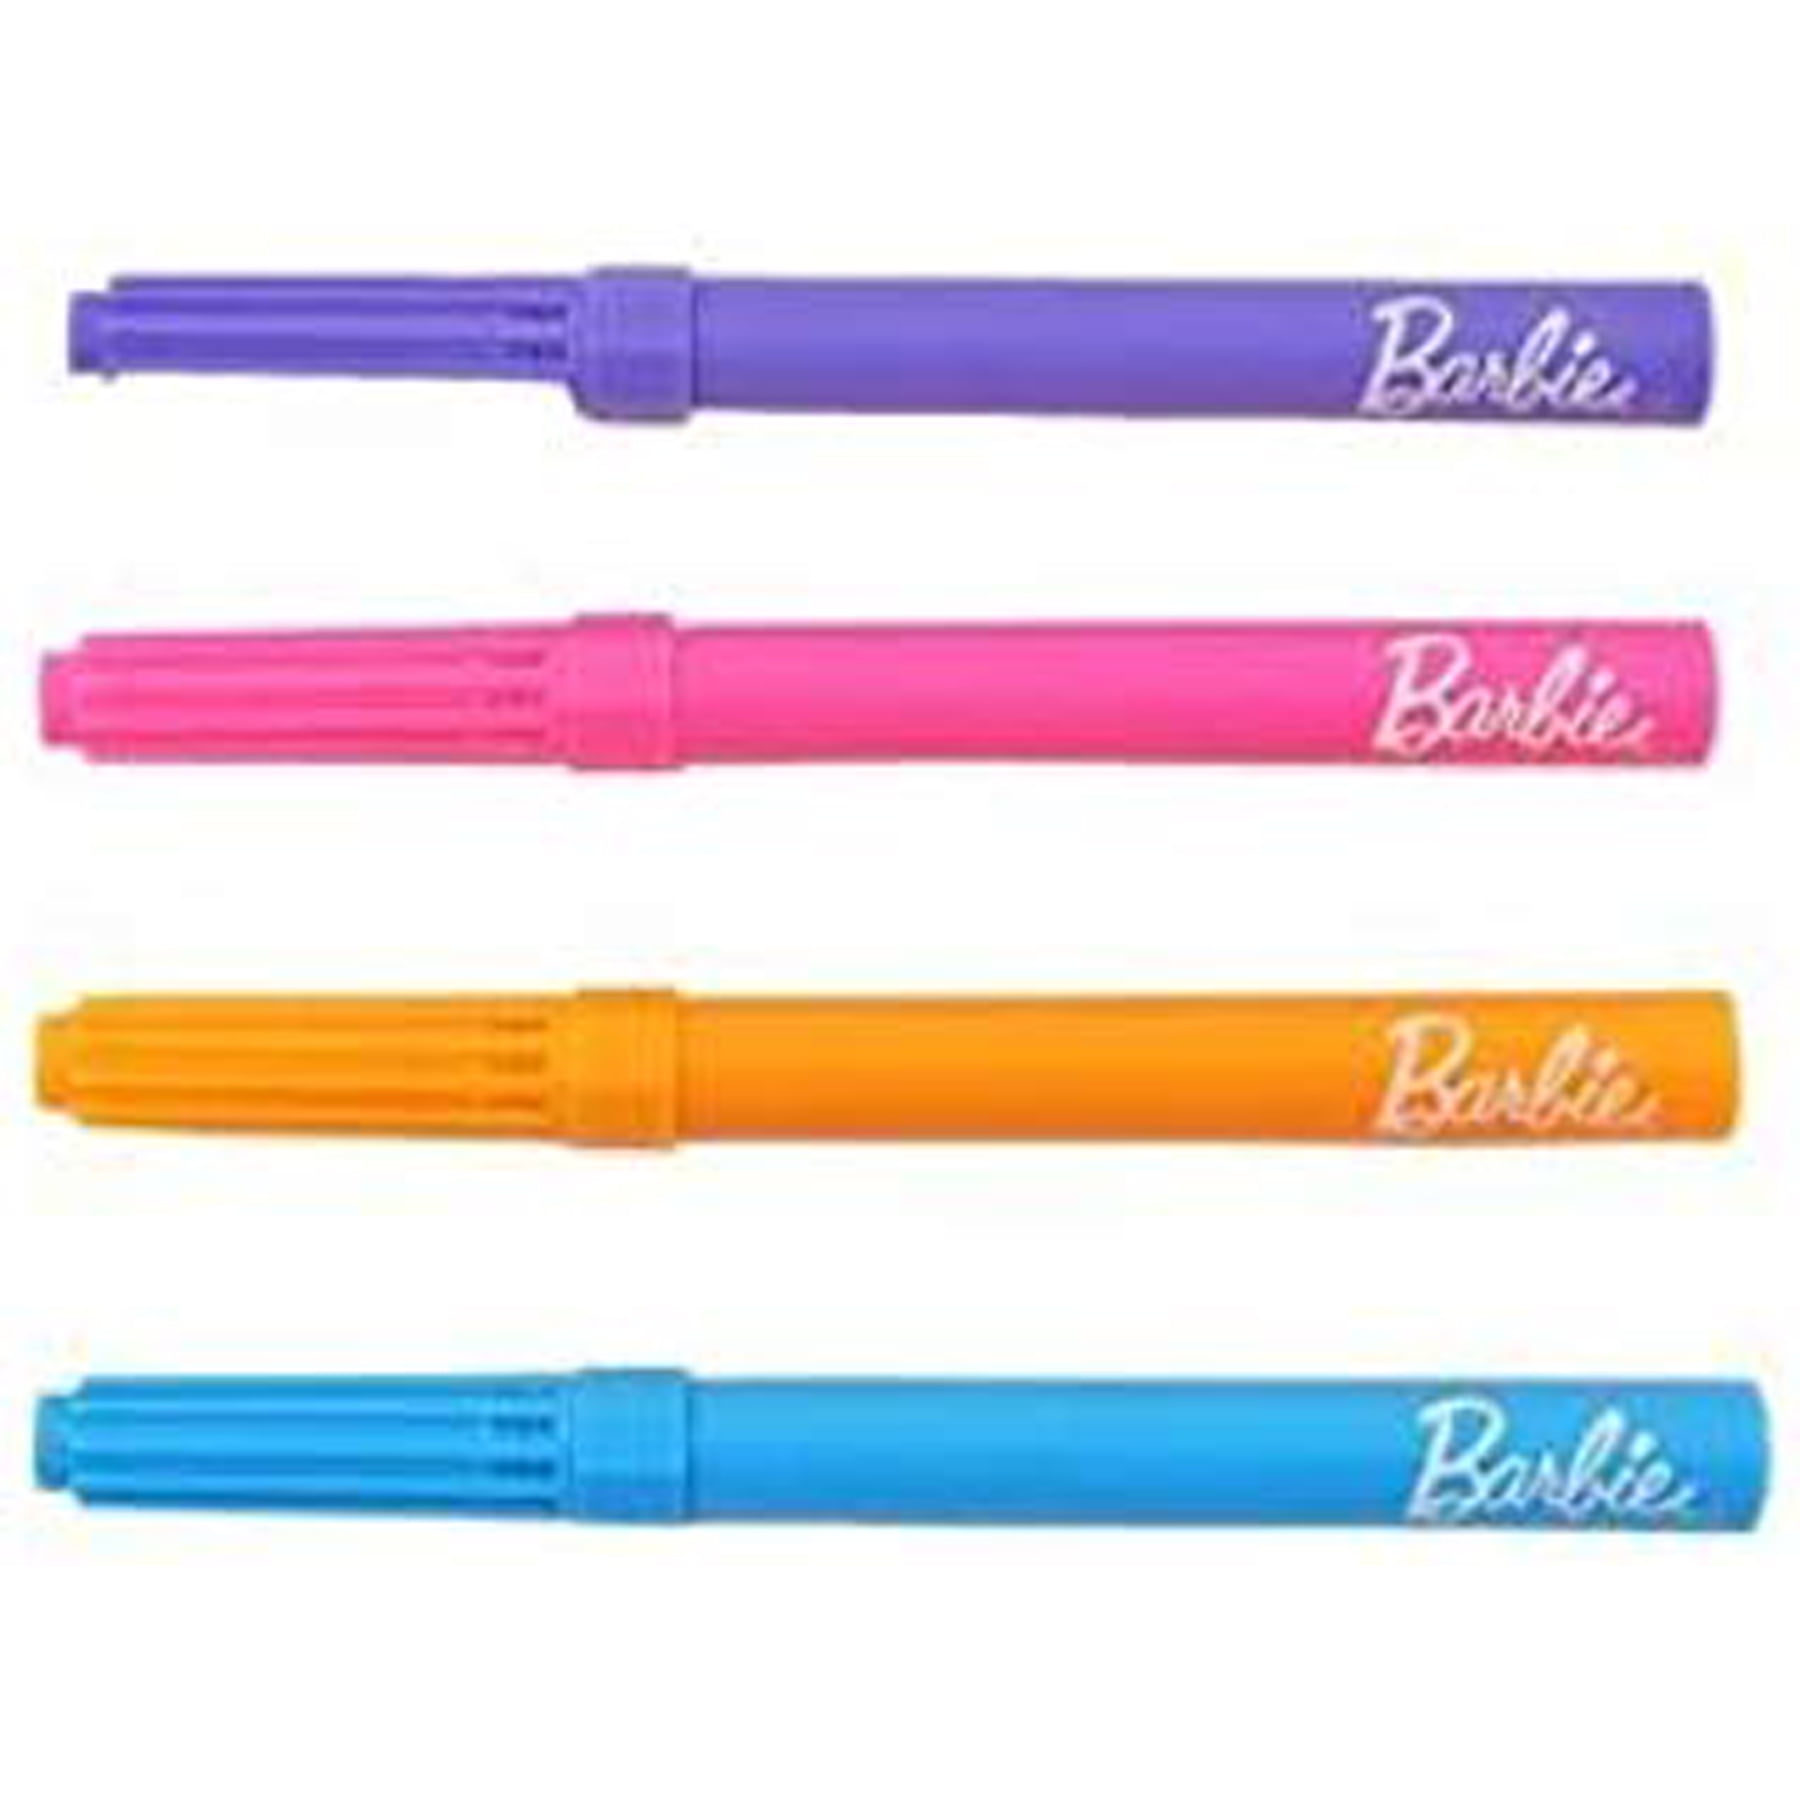 New Barbie Airbrush Designer Marker Replacement Pens Set of 4 